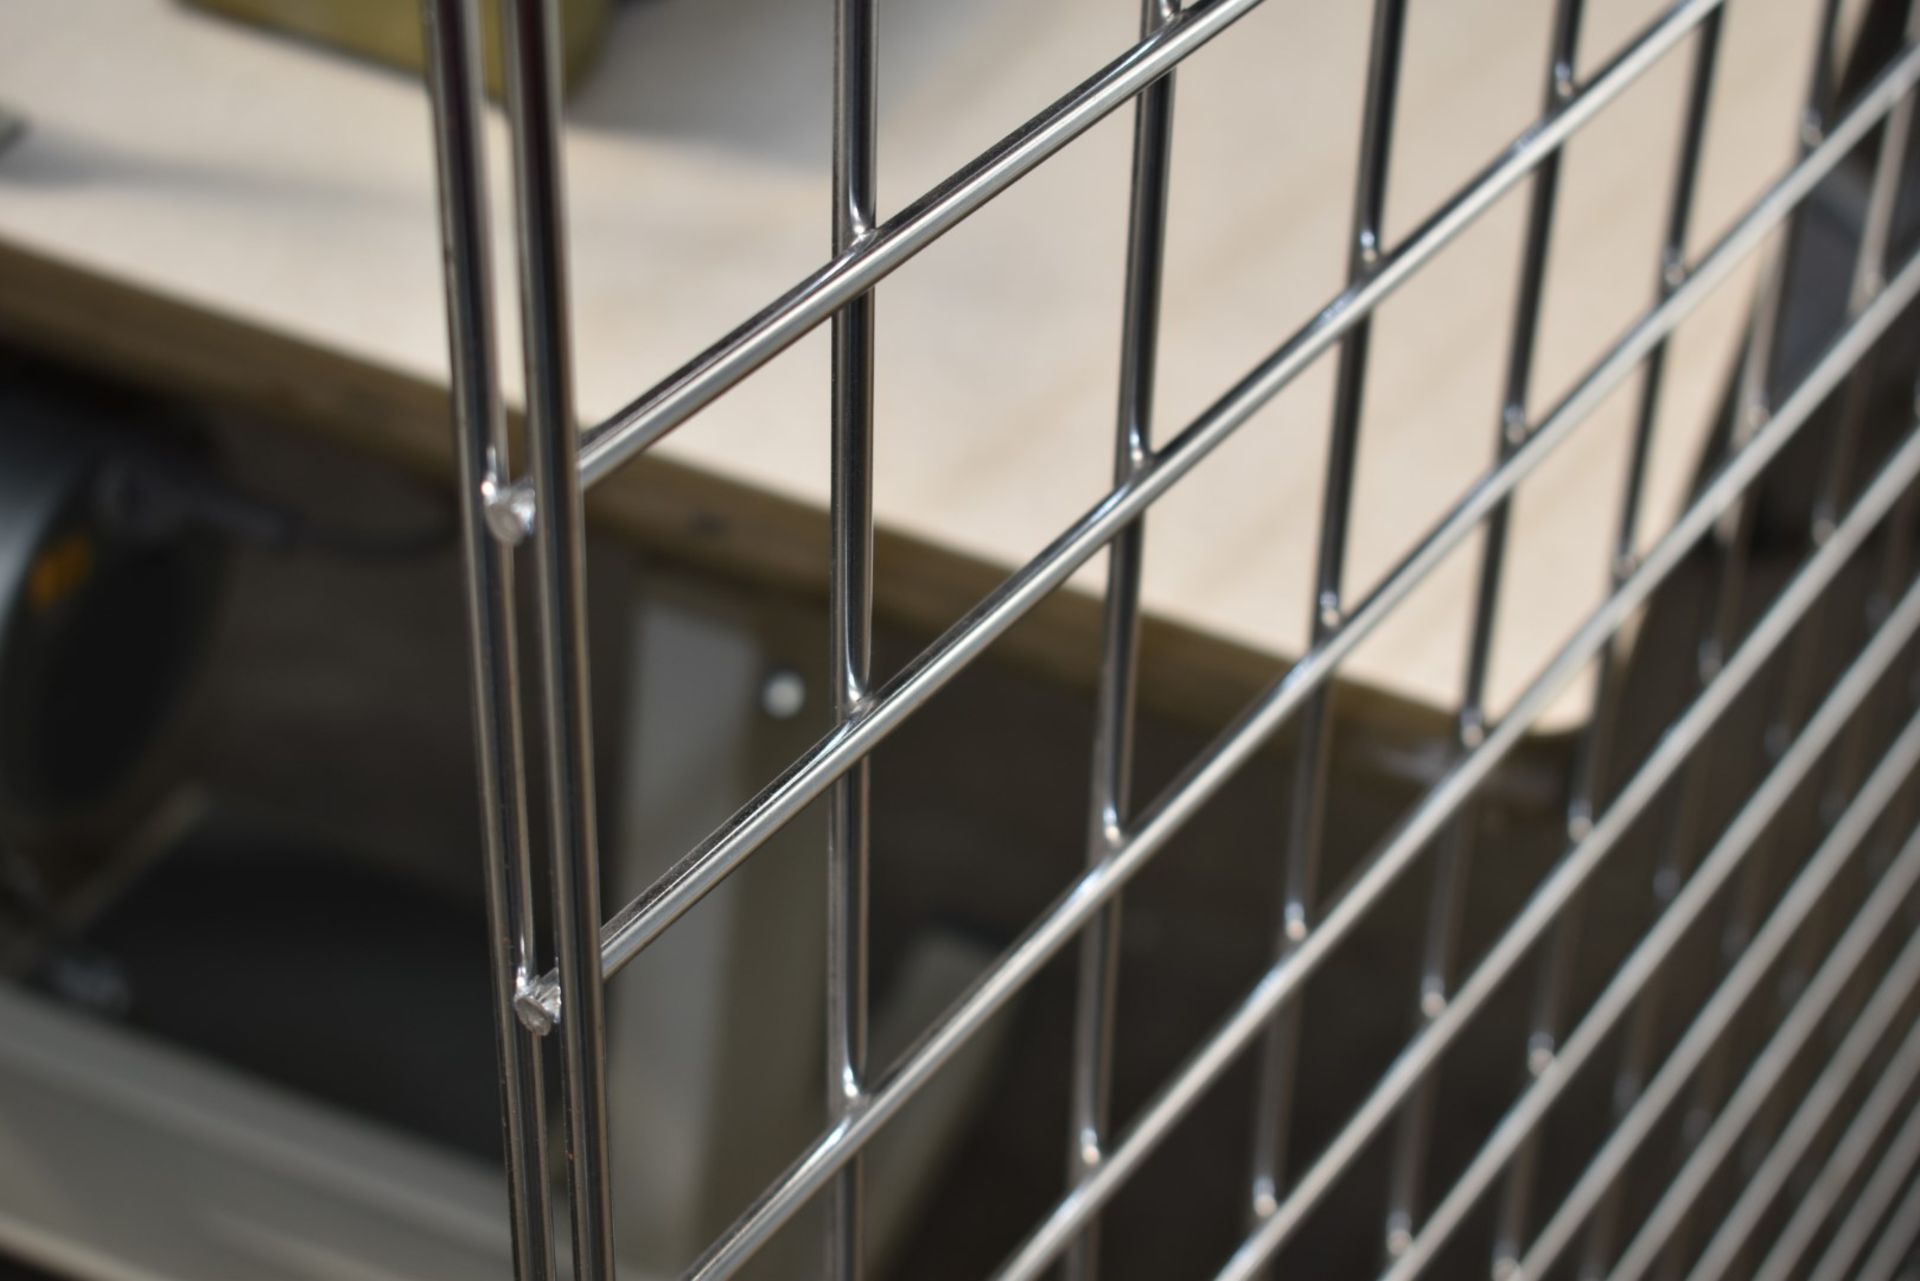 6 x Gridwall Mesh Wall Panels - Heavy Metal Construction in Chrome - Ideal For Making Security Cages - Image 5 of 7